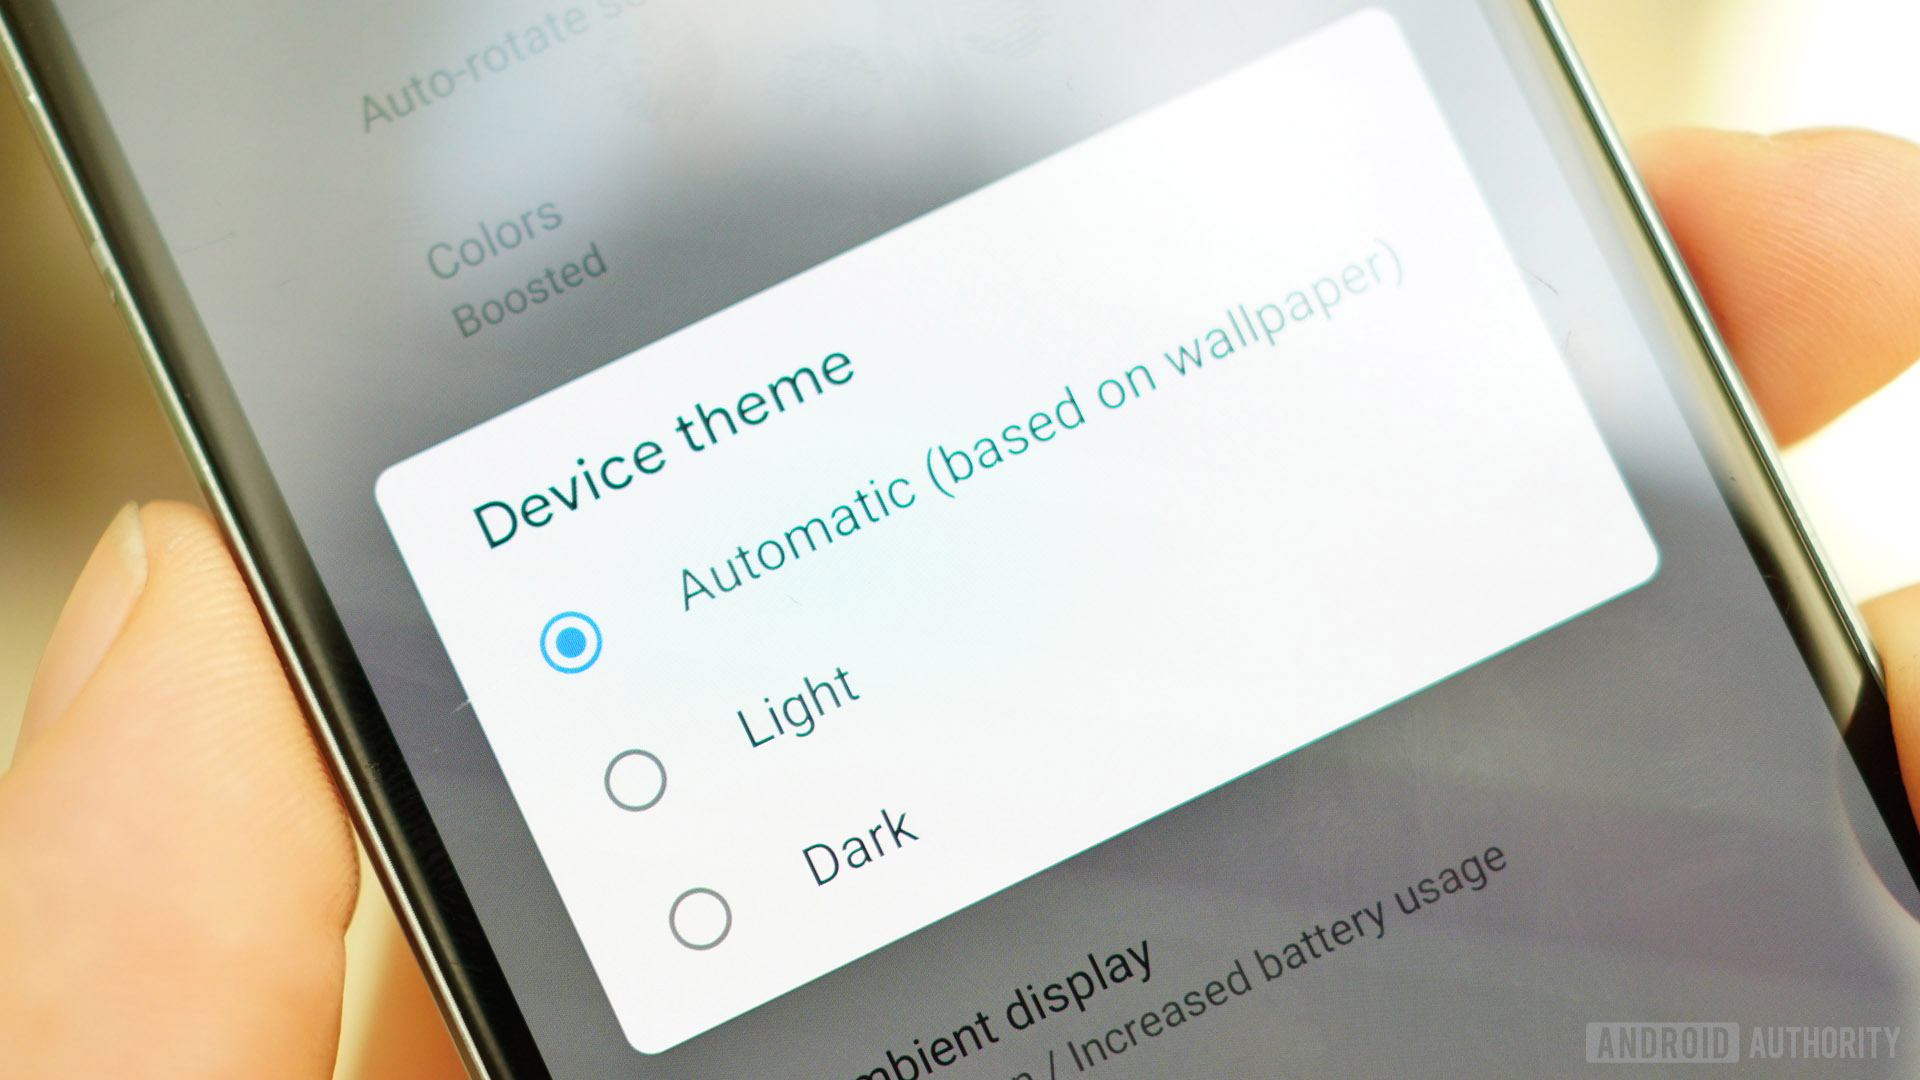 Android 9 Pie review device theme light, dark, automatic